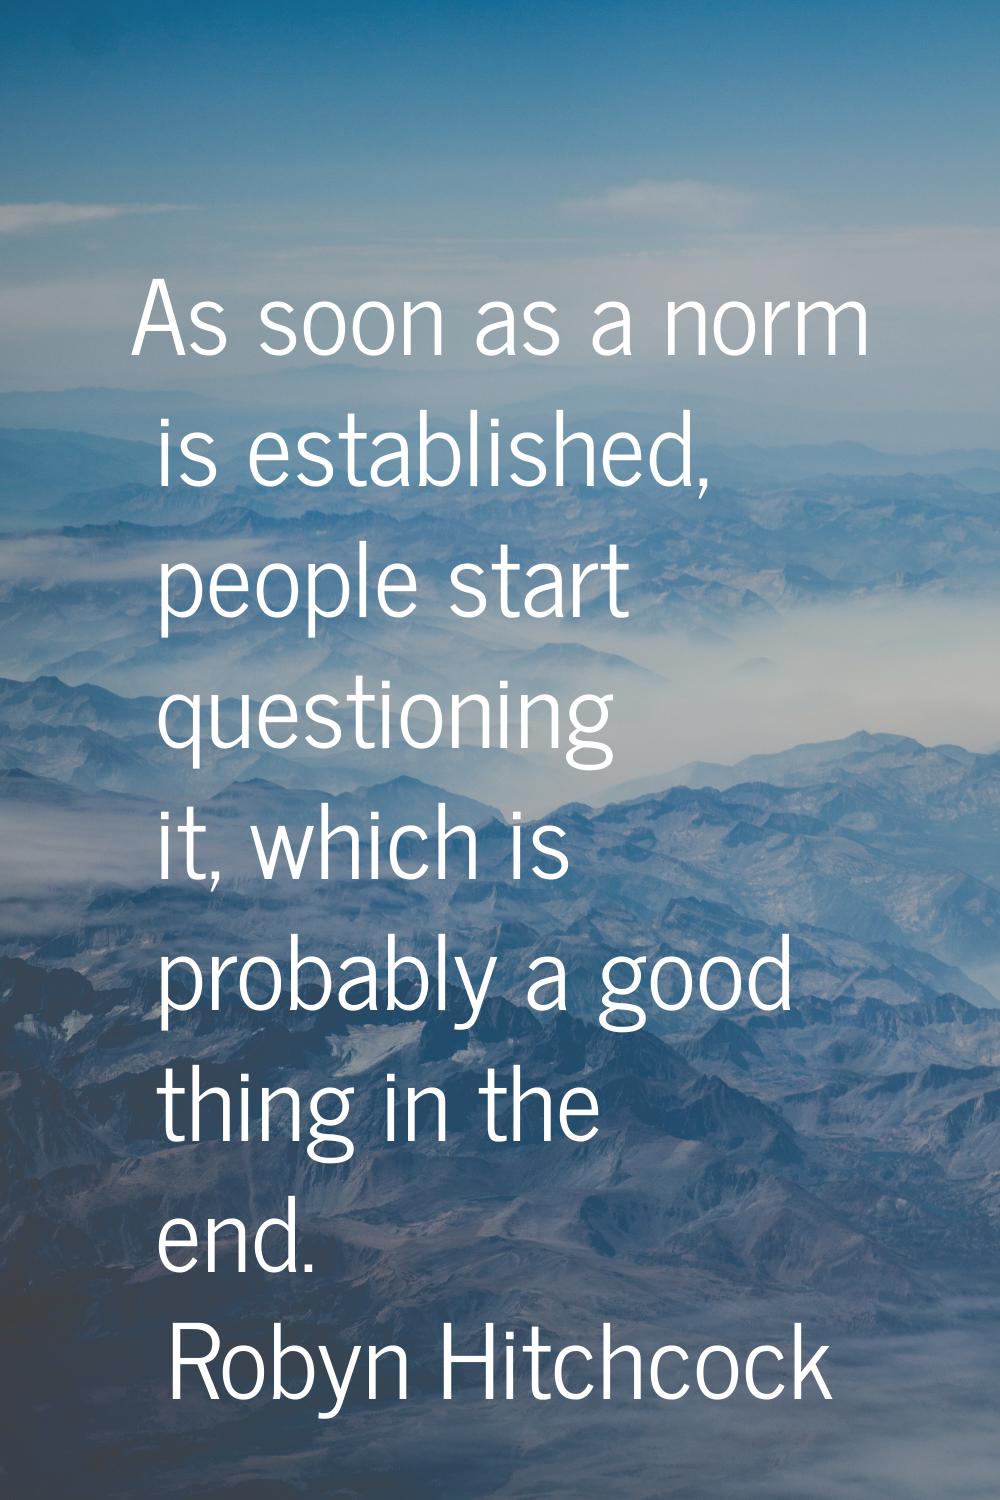 As soon as a norm is established, people start questioning it, which is probably a good thing in th